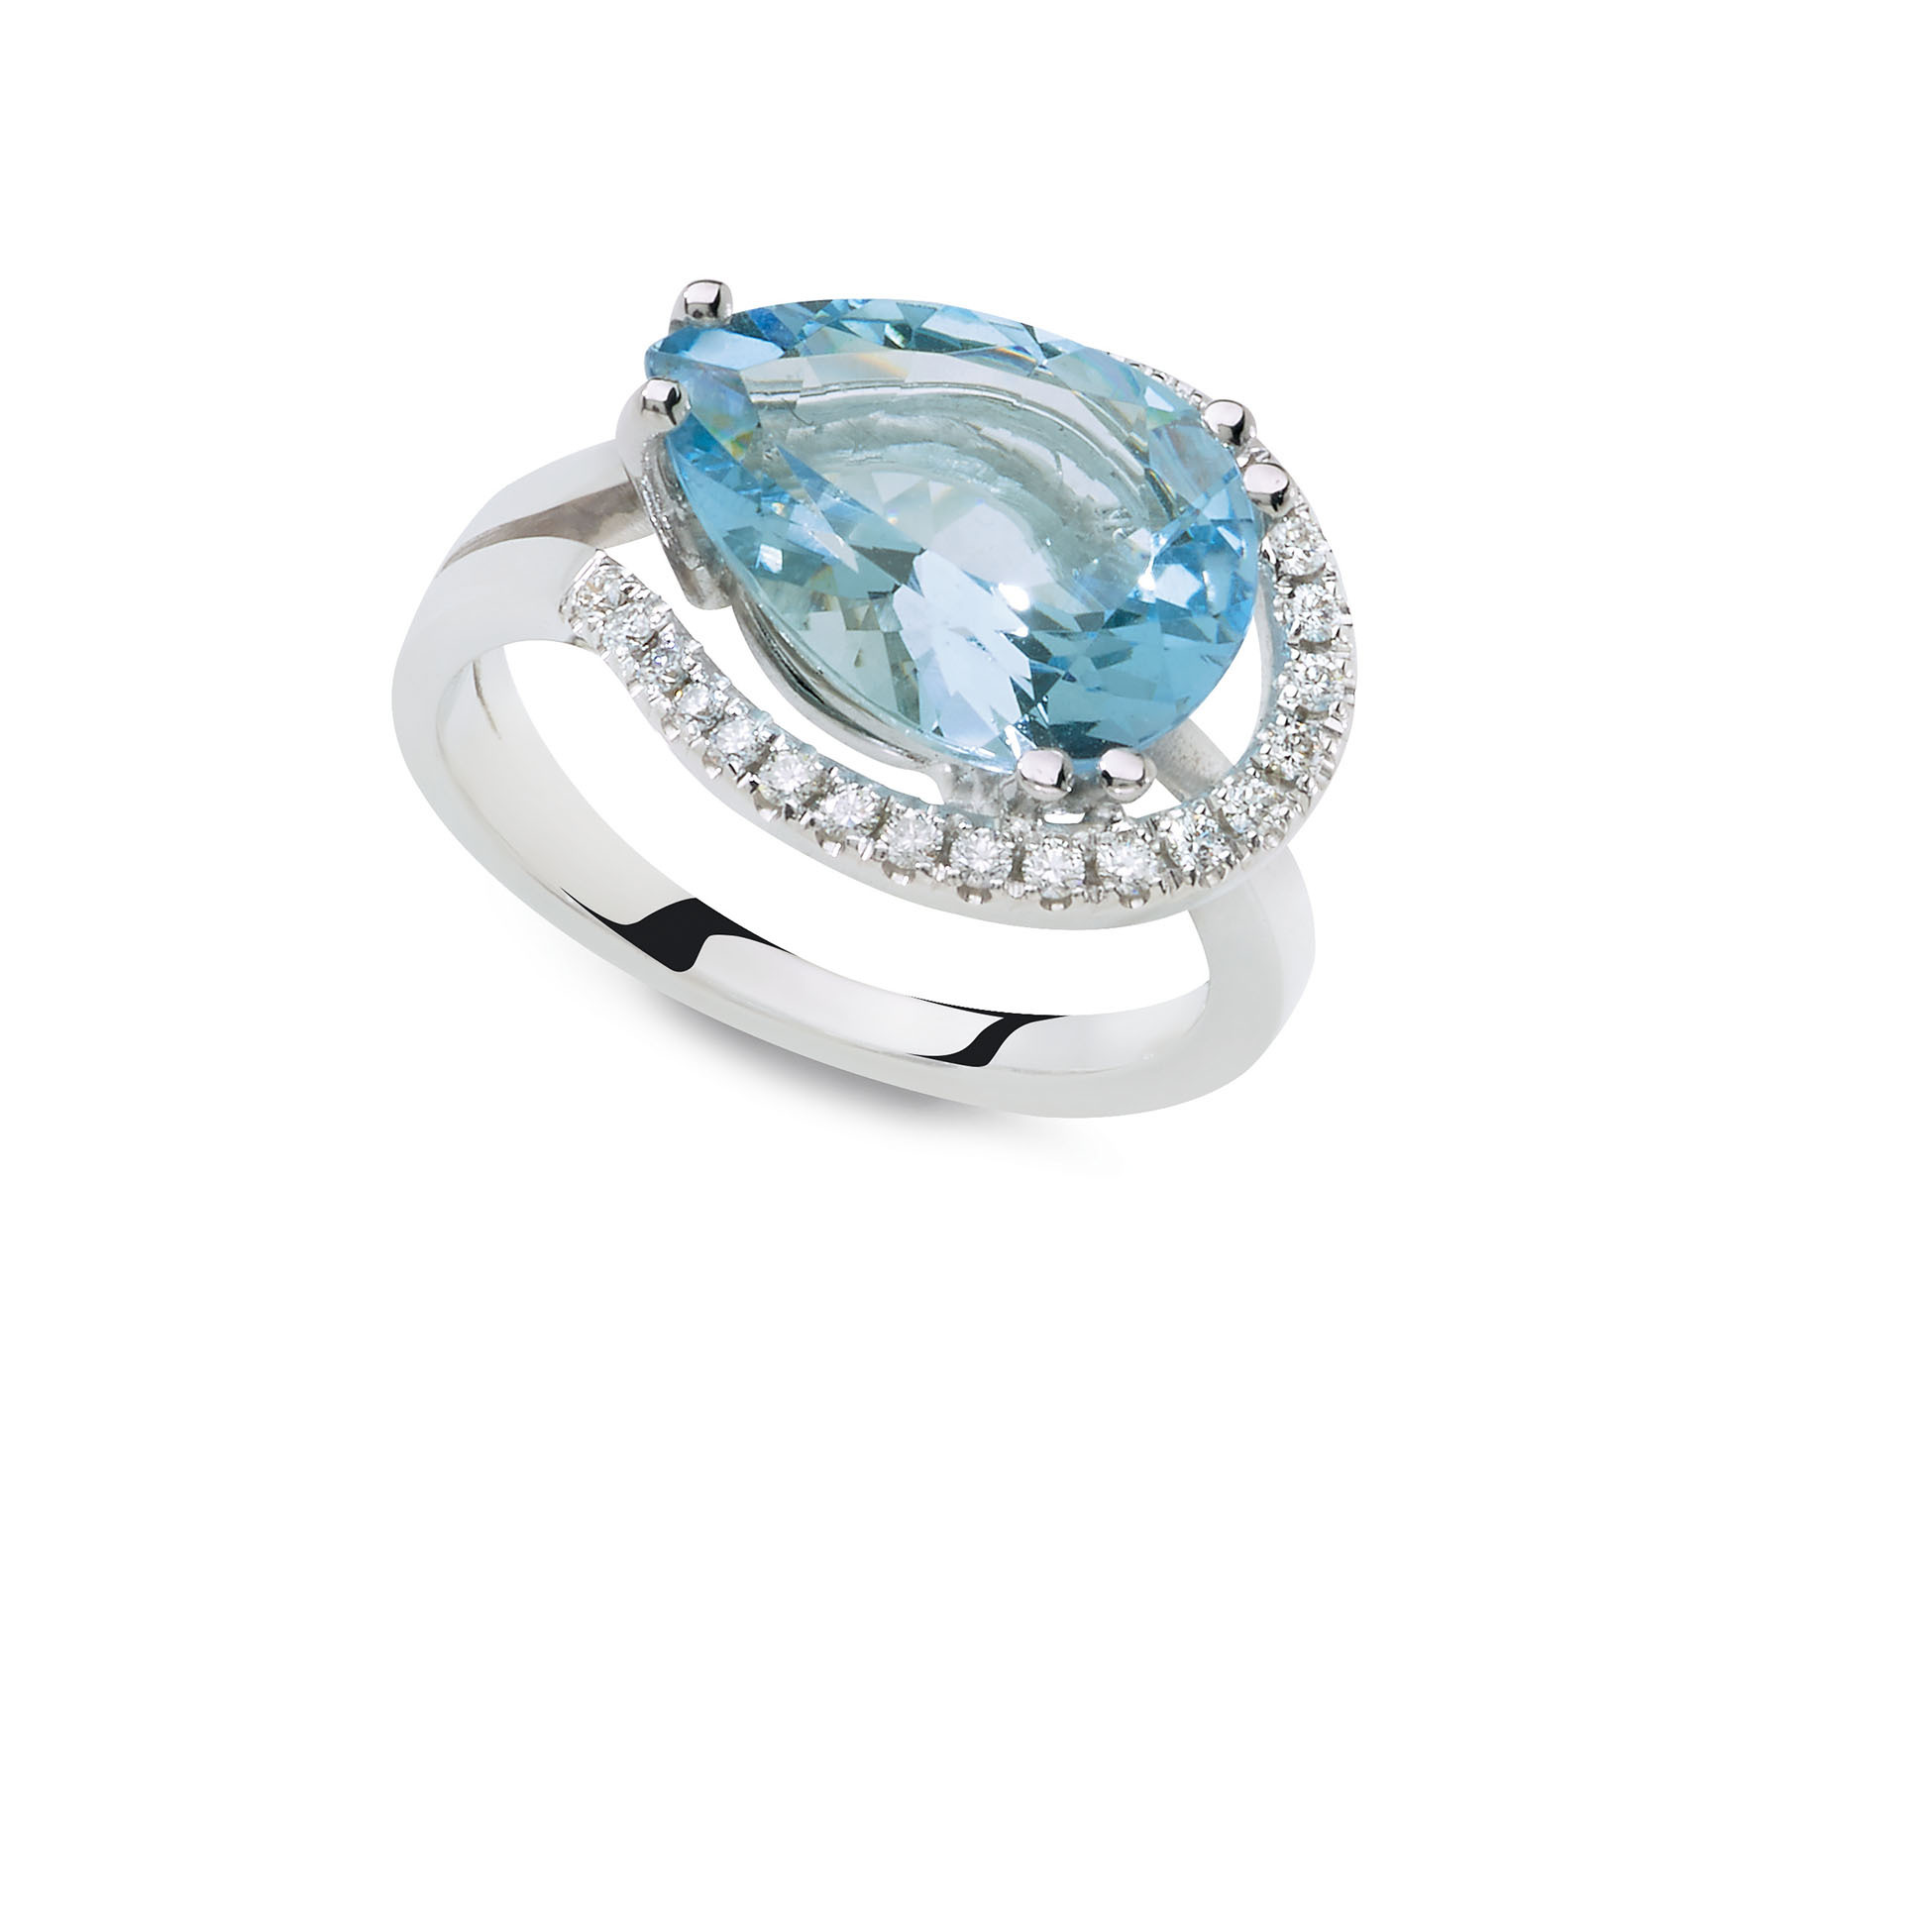 5221rx6w exel collection rings aquamarine